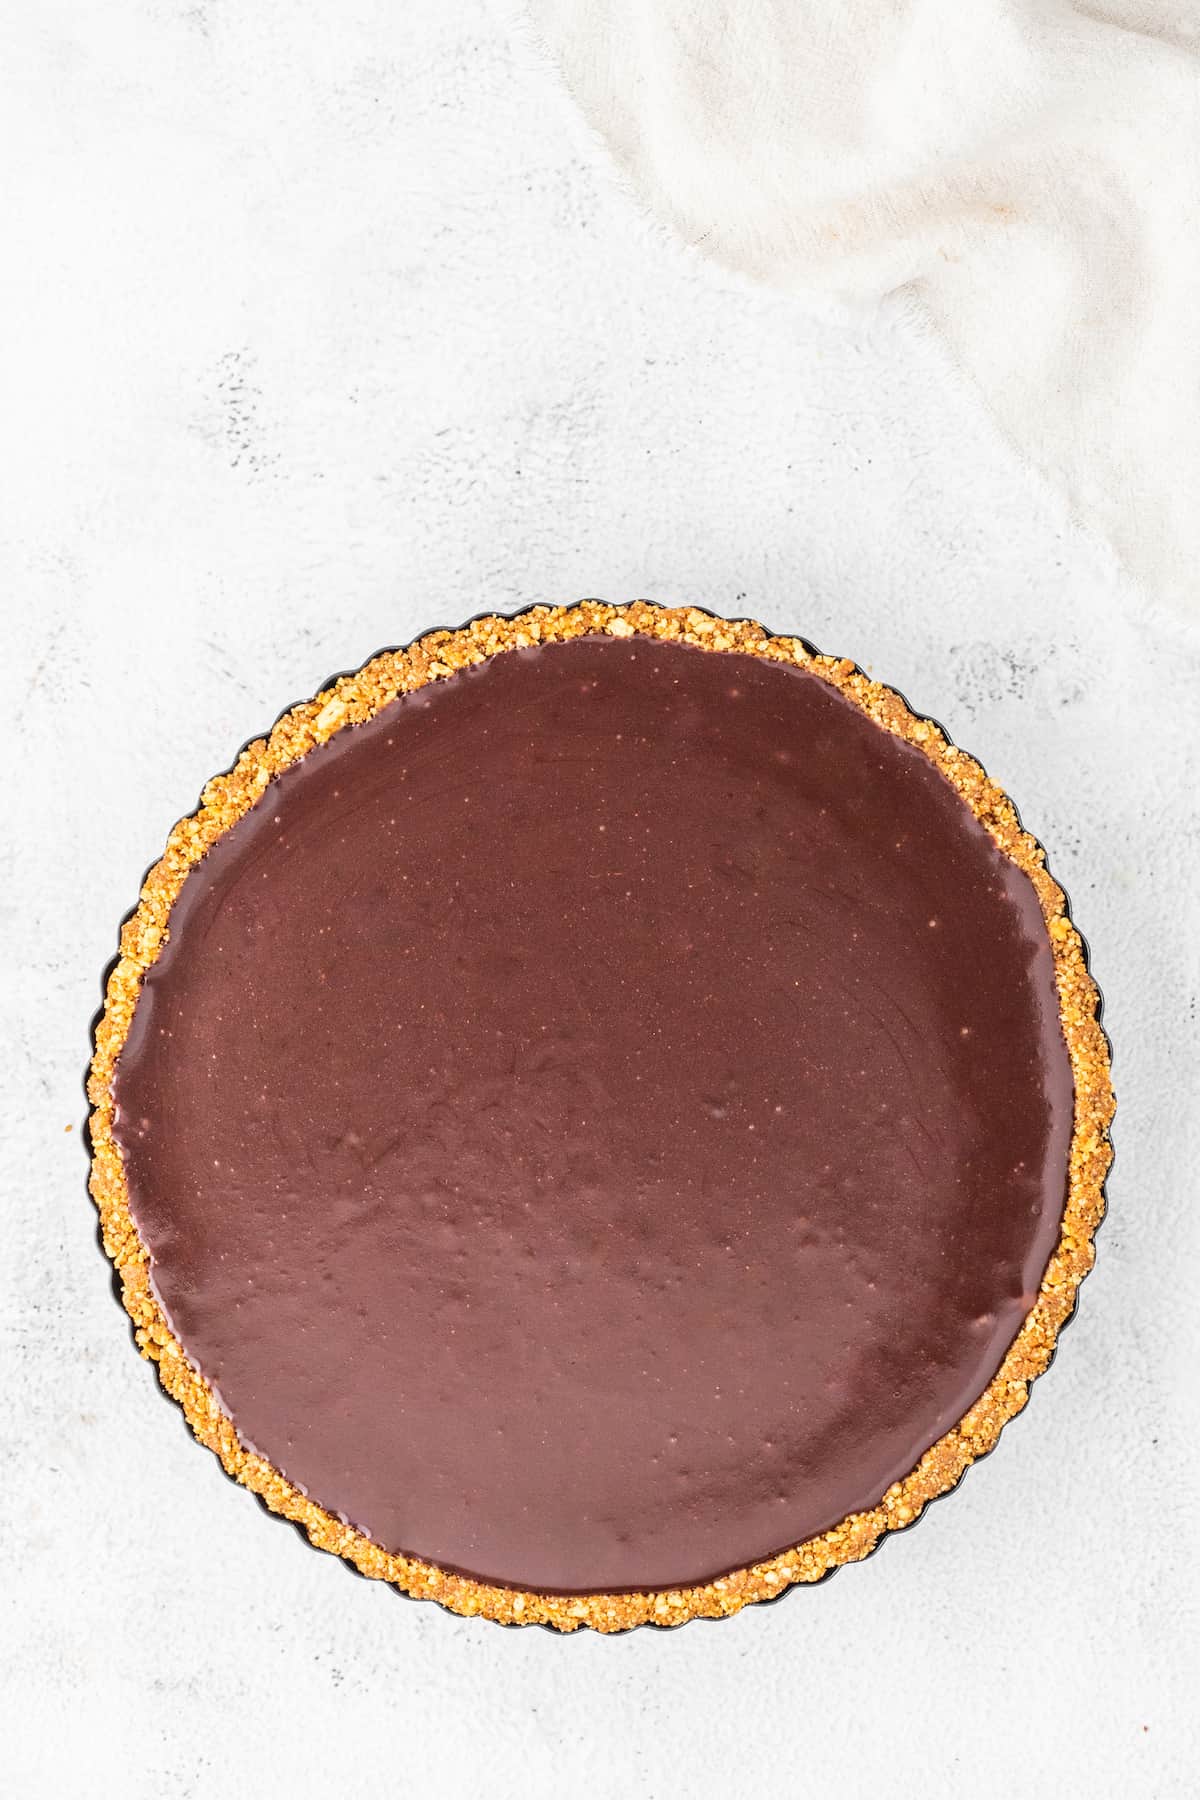 A gingerbread chocolate tart on a white surface.